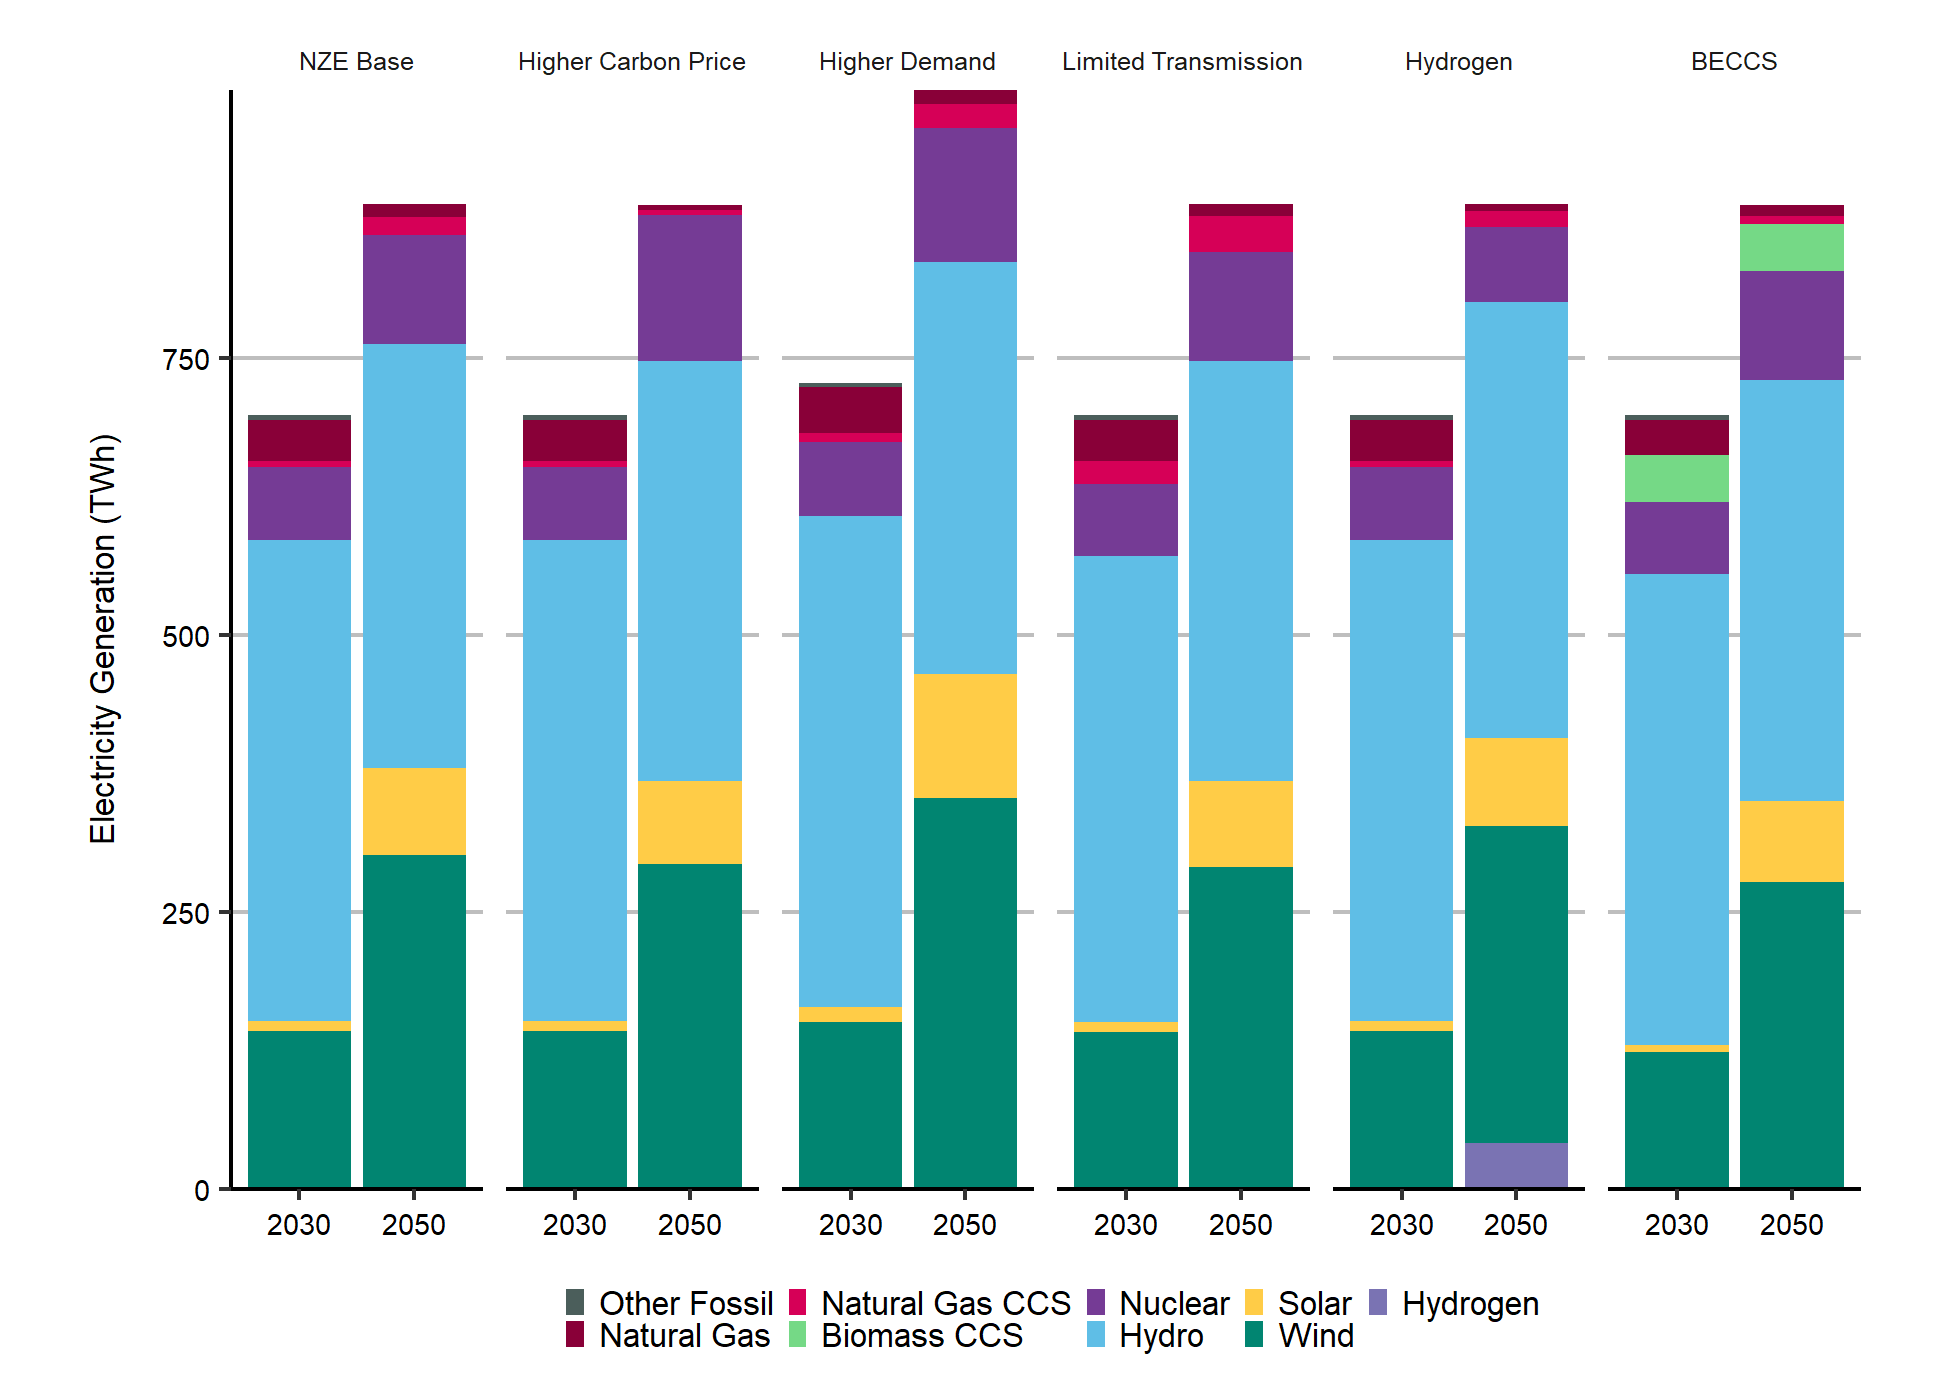 Electricity Generation by Technology in Different Scenarios